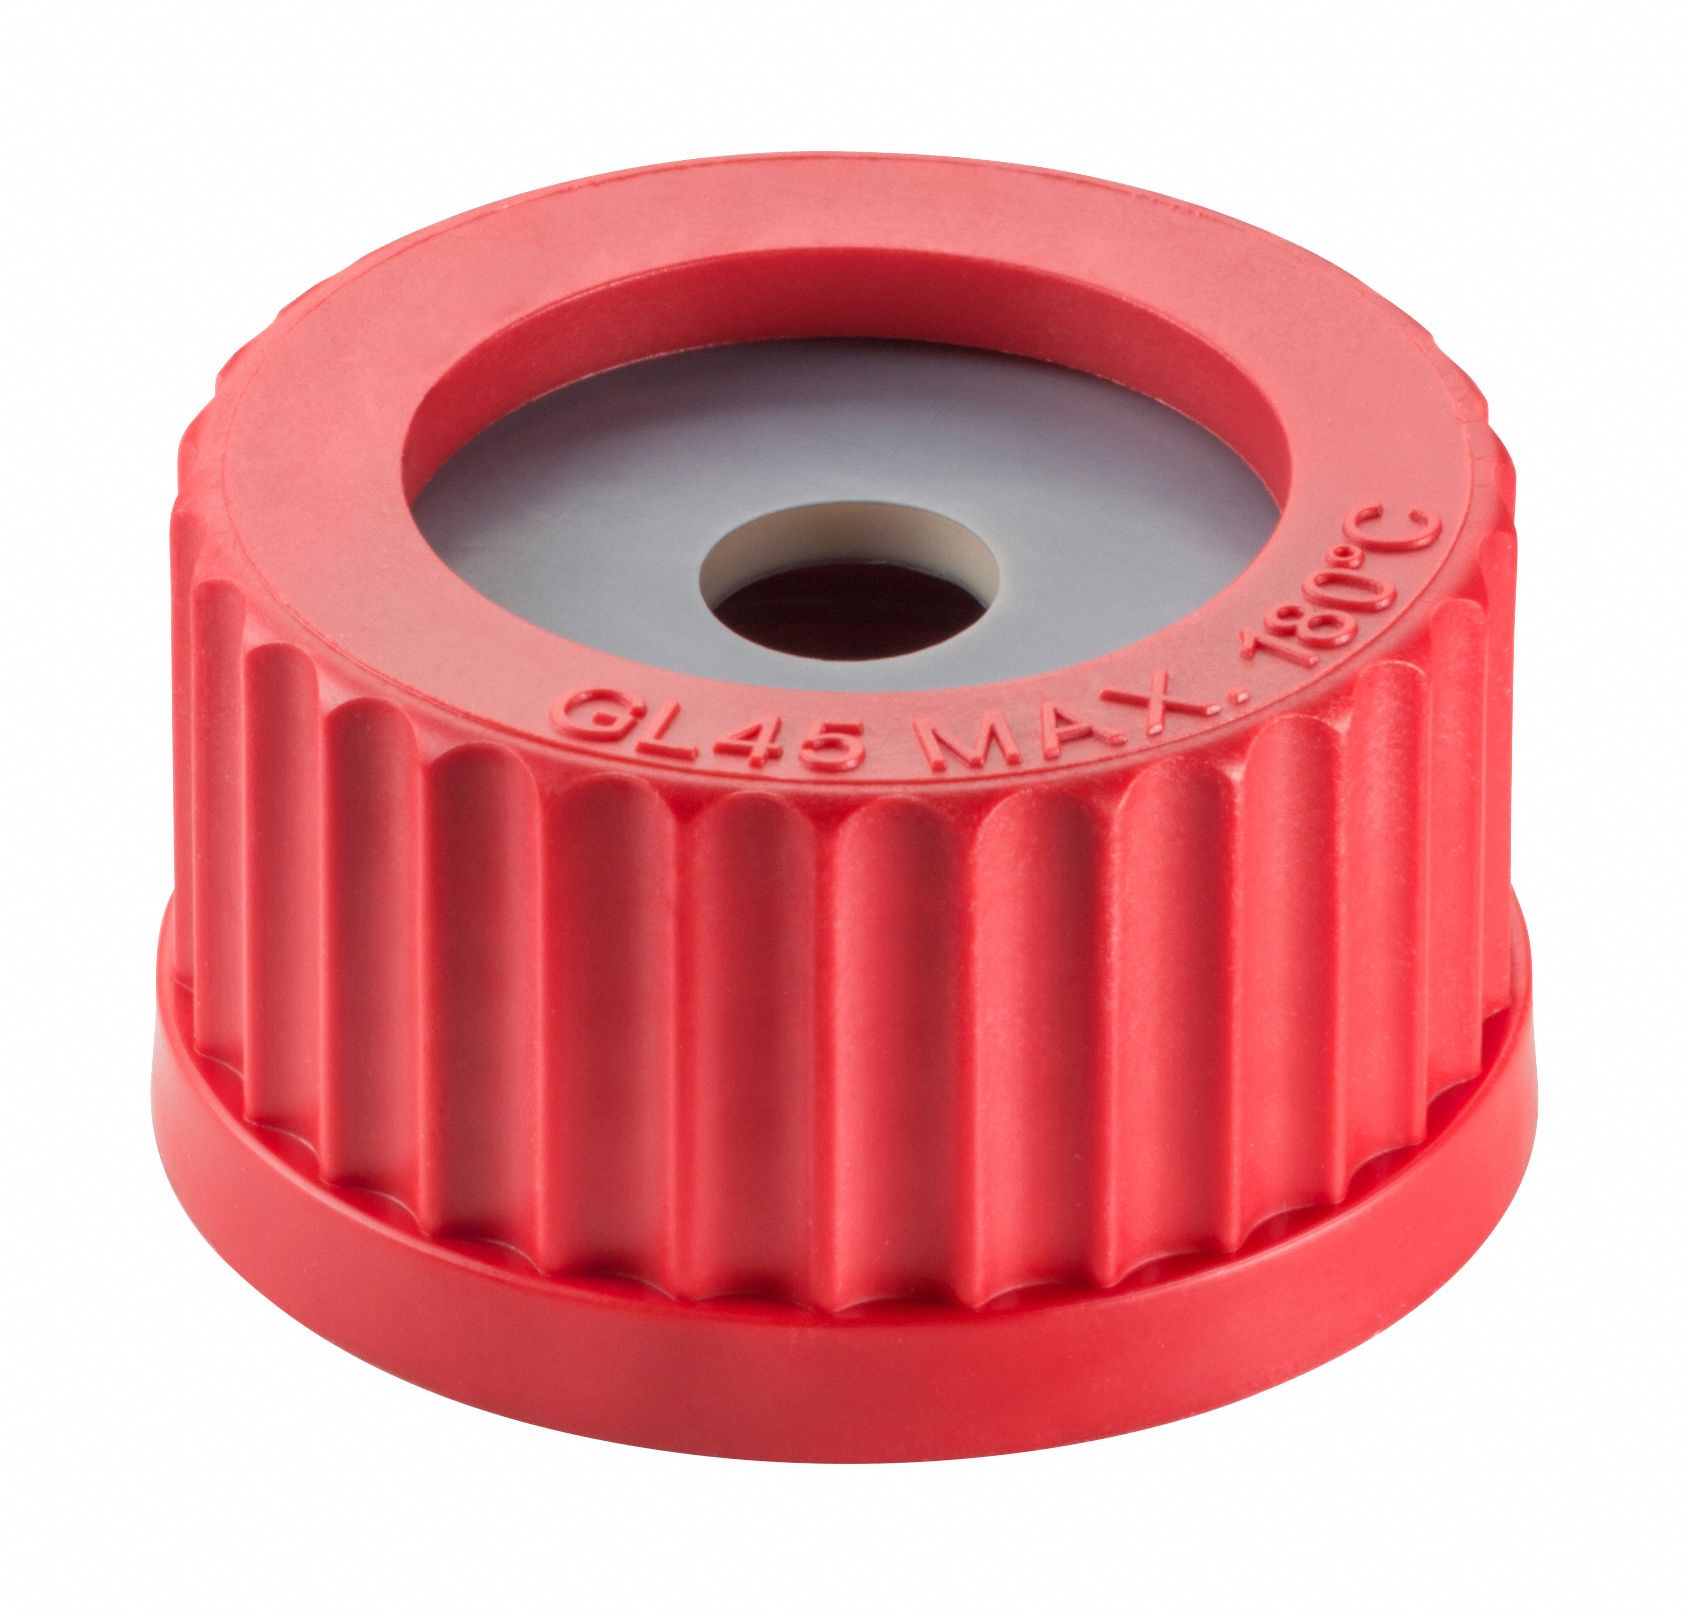 Electrode Holder Cap: GL45 Labware Screw Closure Size, PBT, PTFE/Silicone, Open Top